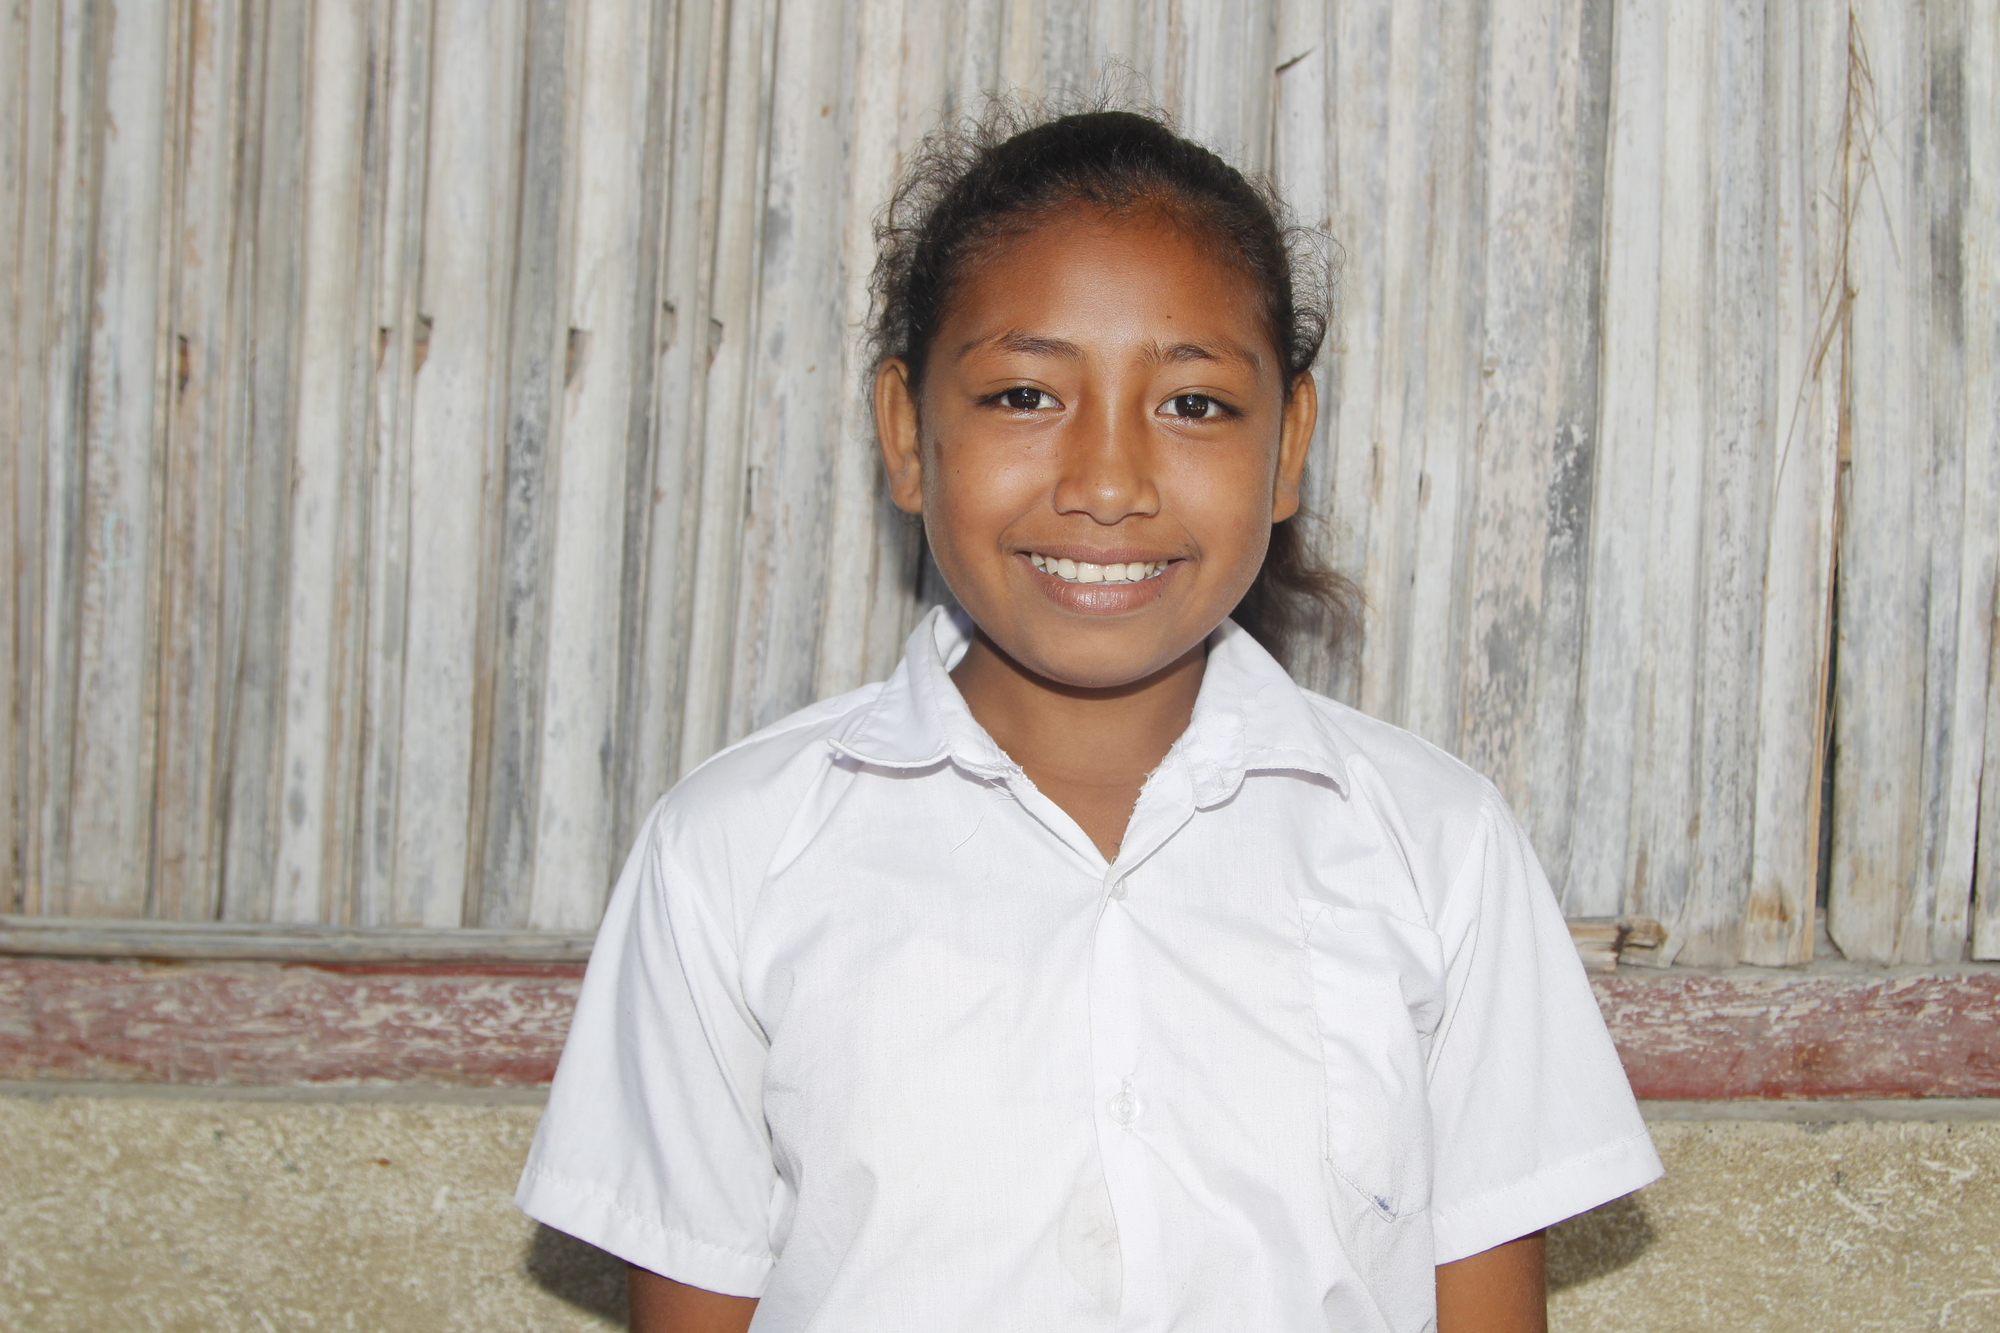 Maria, a Grade 6 student at a primary school, is happy to have the new water and sanitation facilities at her school. Photo: Jaime dos Reis/World Vision